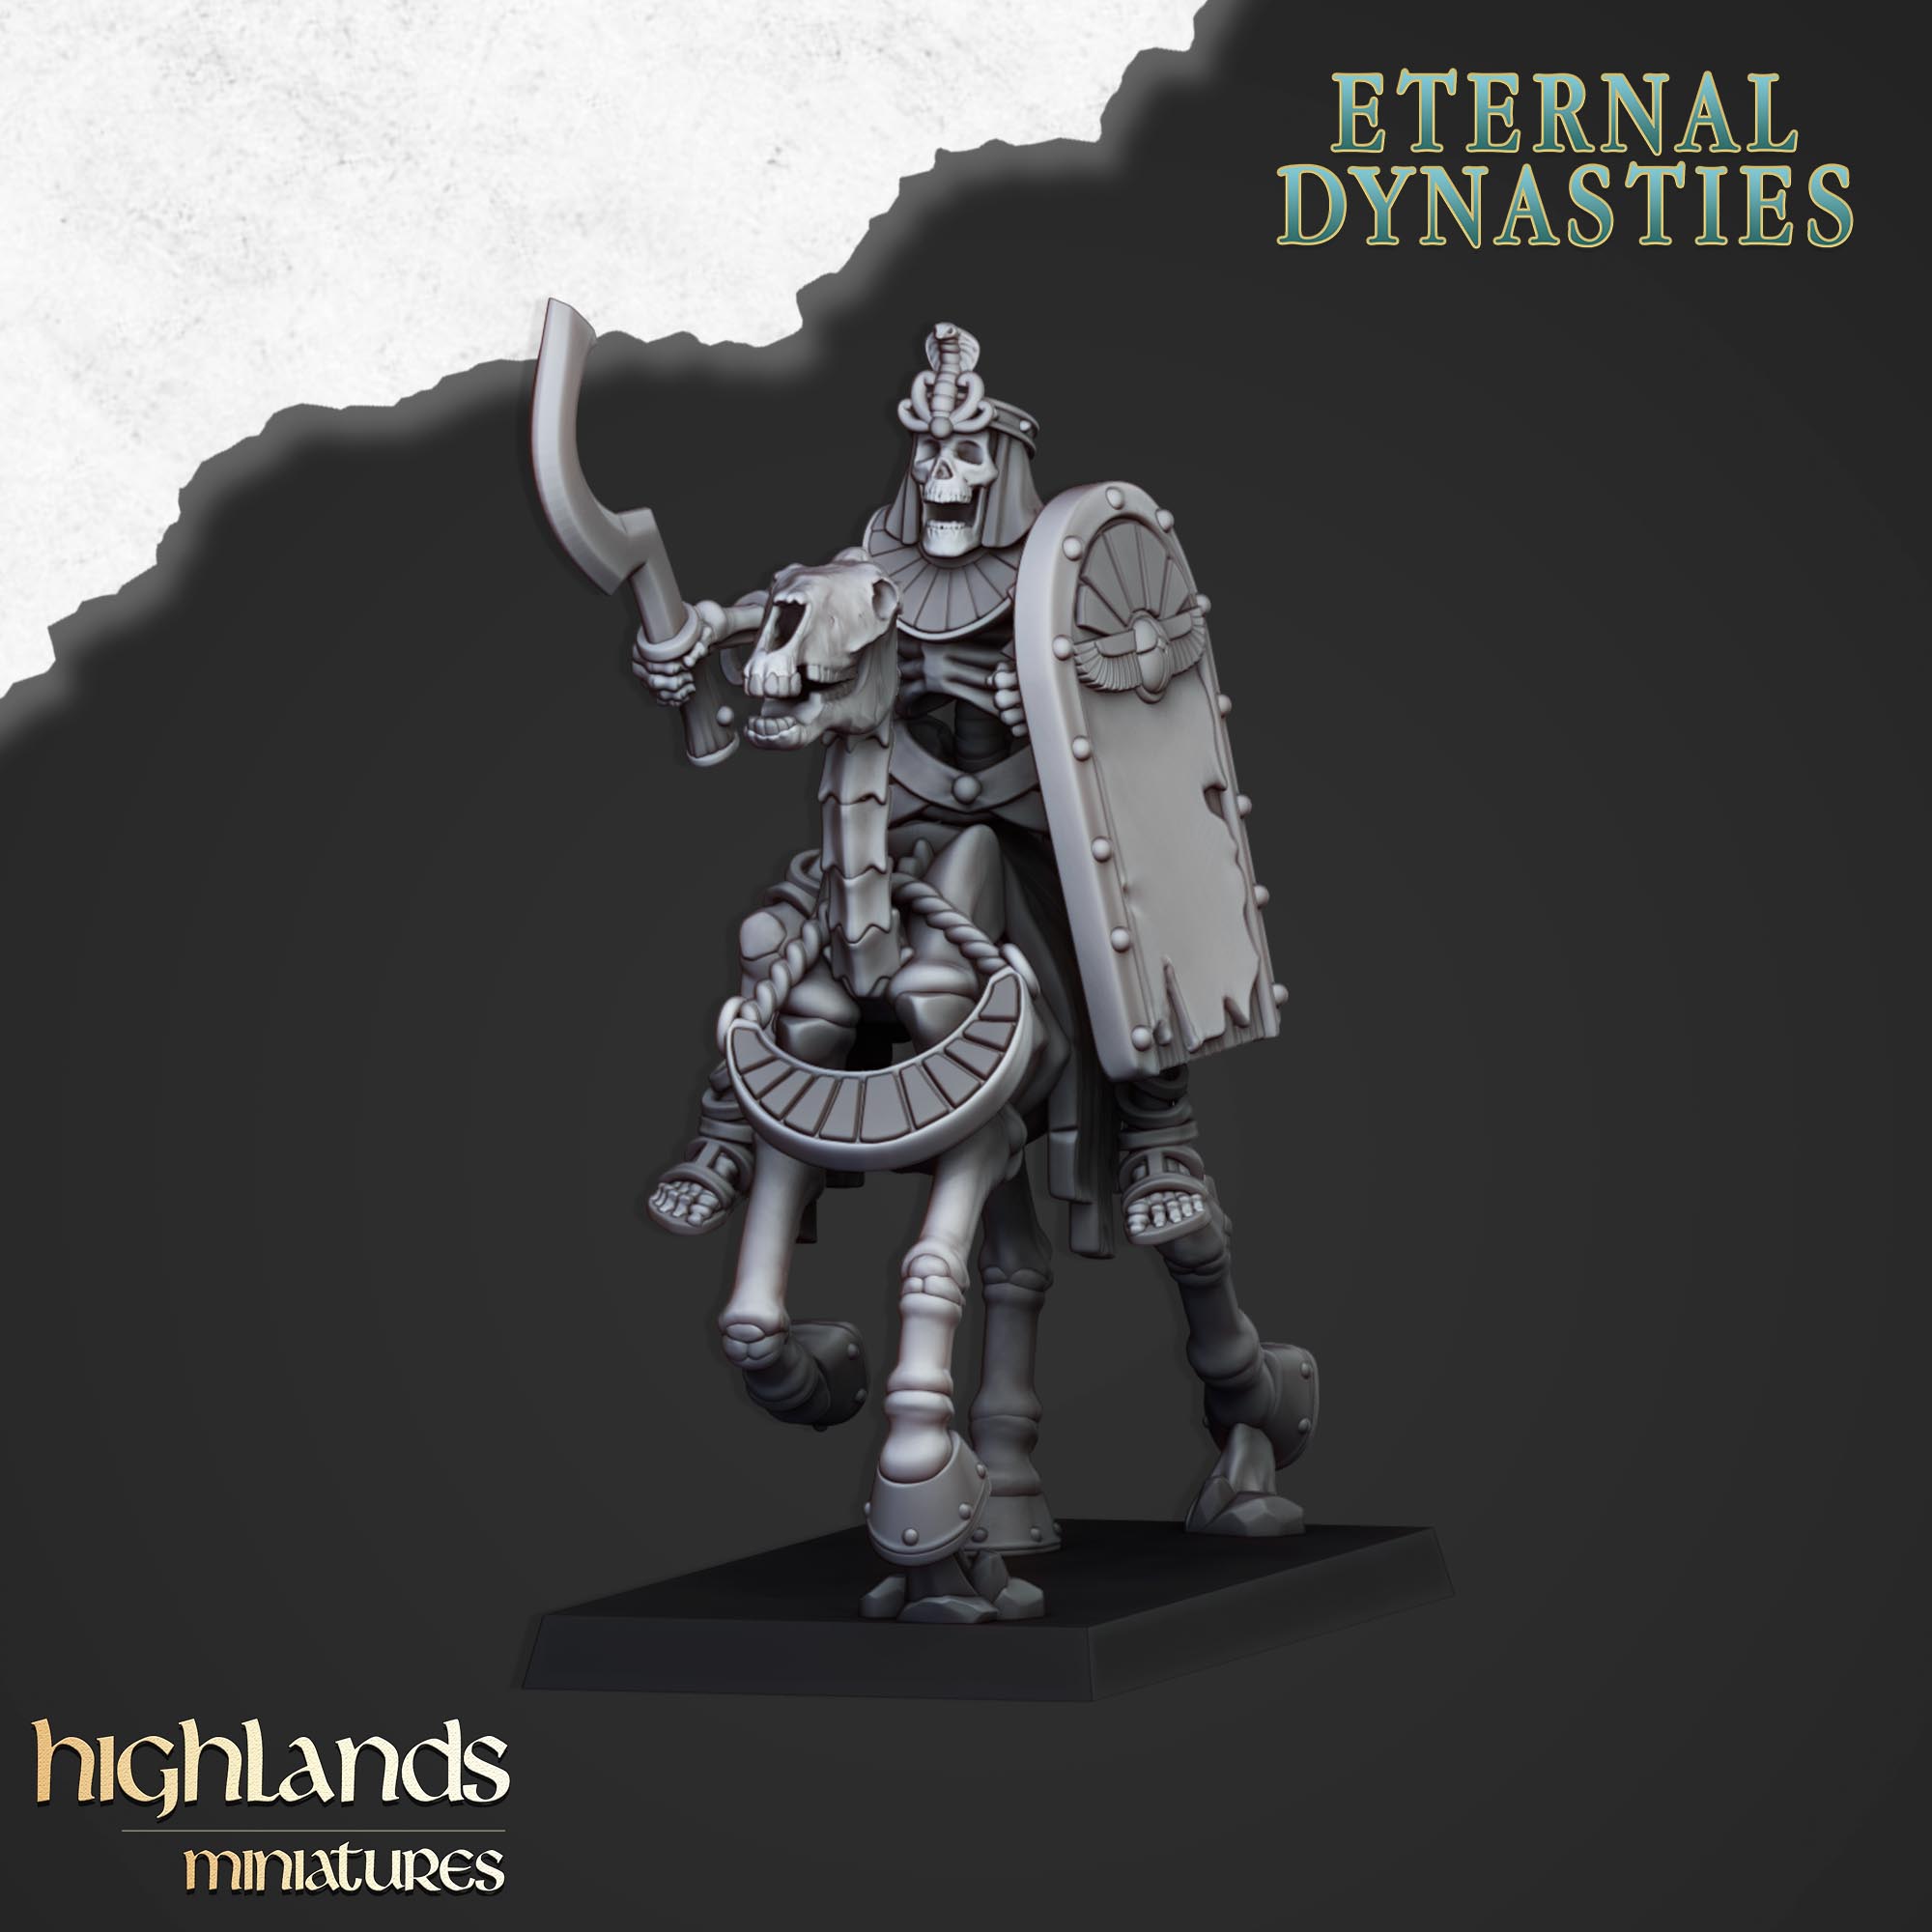 Ancient Skeletal Cavalry with Bows - Eternal Dynasties | Highlands Miniatures